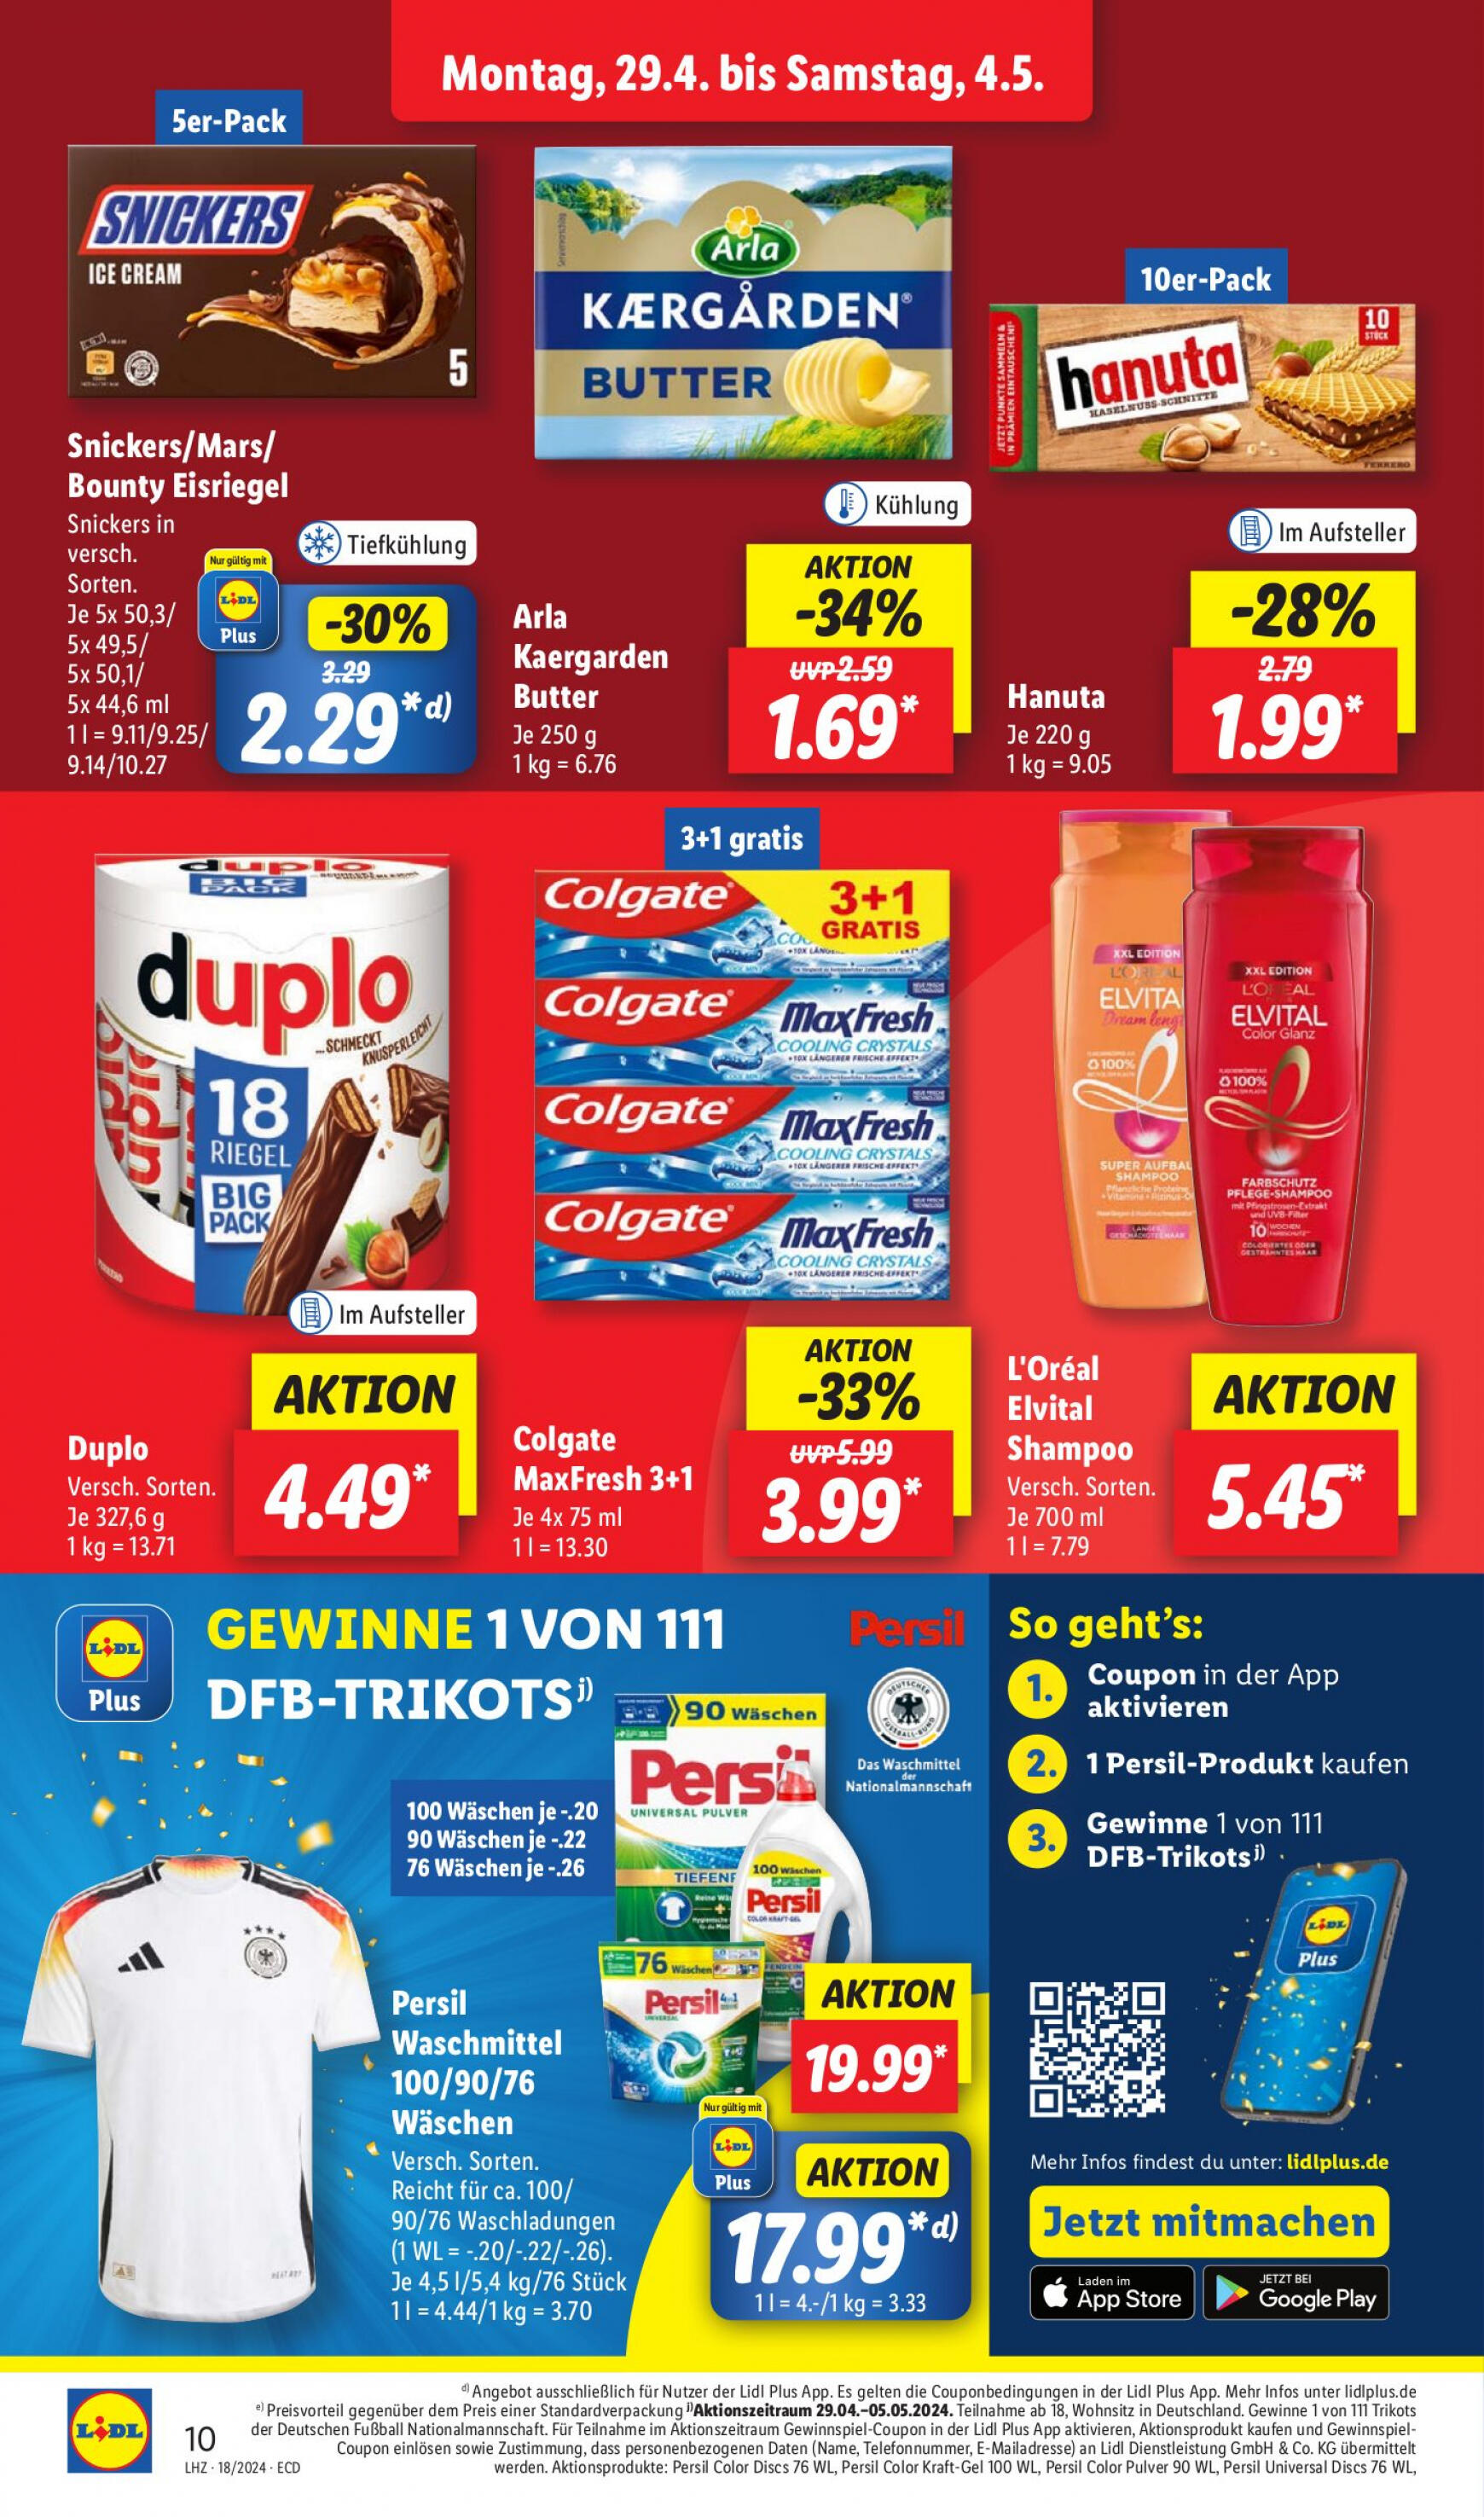 lidl - Flyer Lidl aktuell 29.04. - 04.05. - page: 14